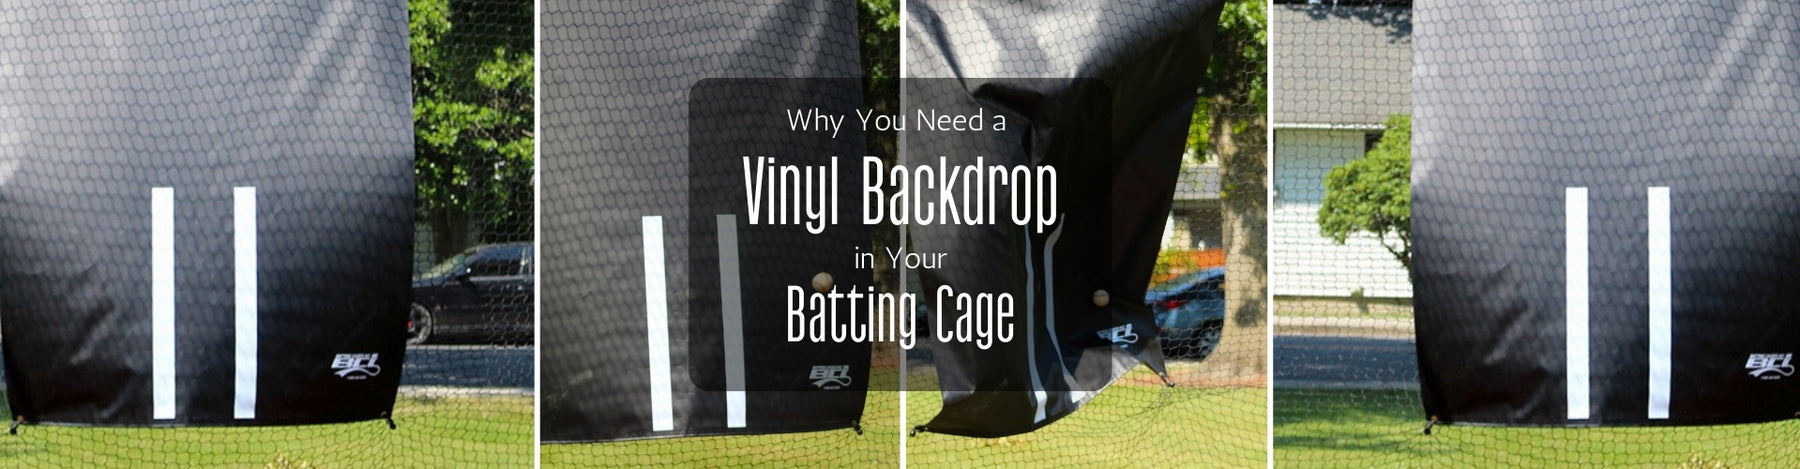 Why You Need a Vinyl Backdrop in Your Batting Cage